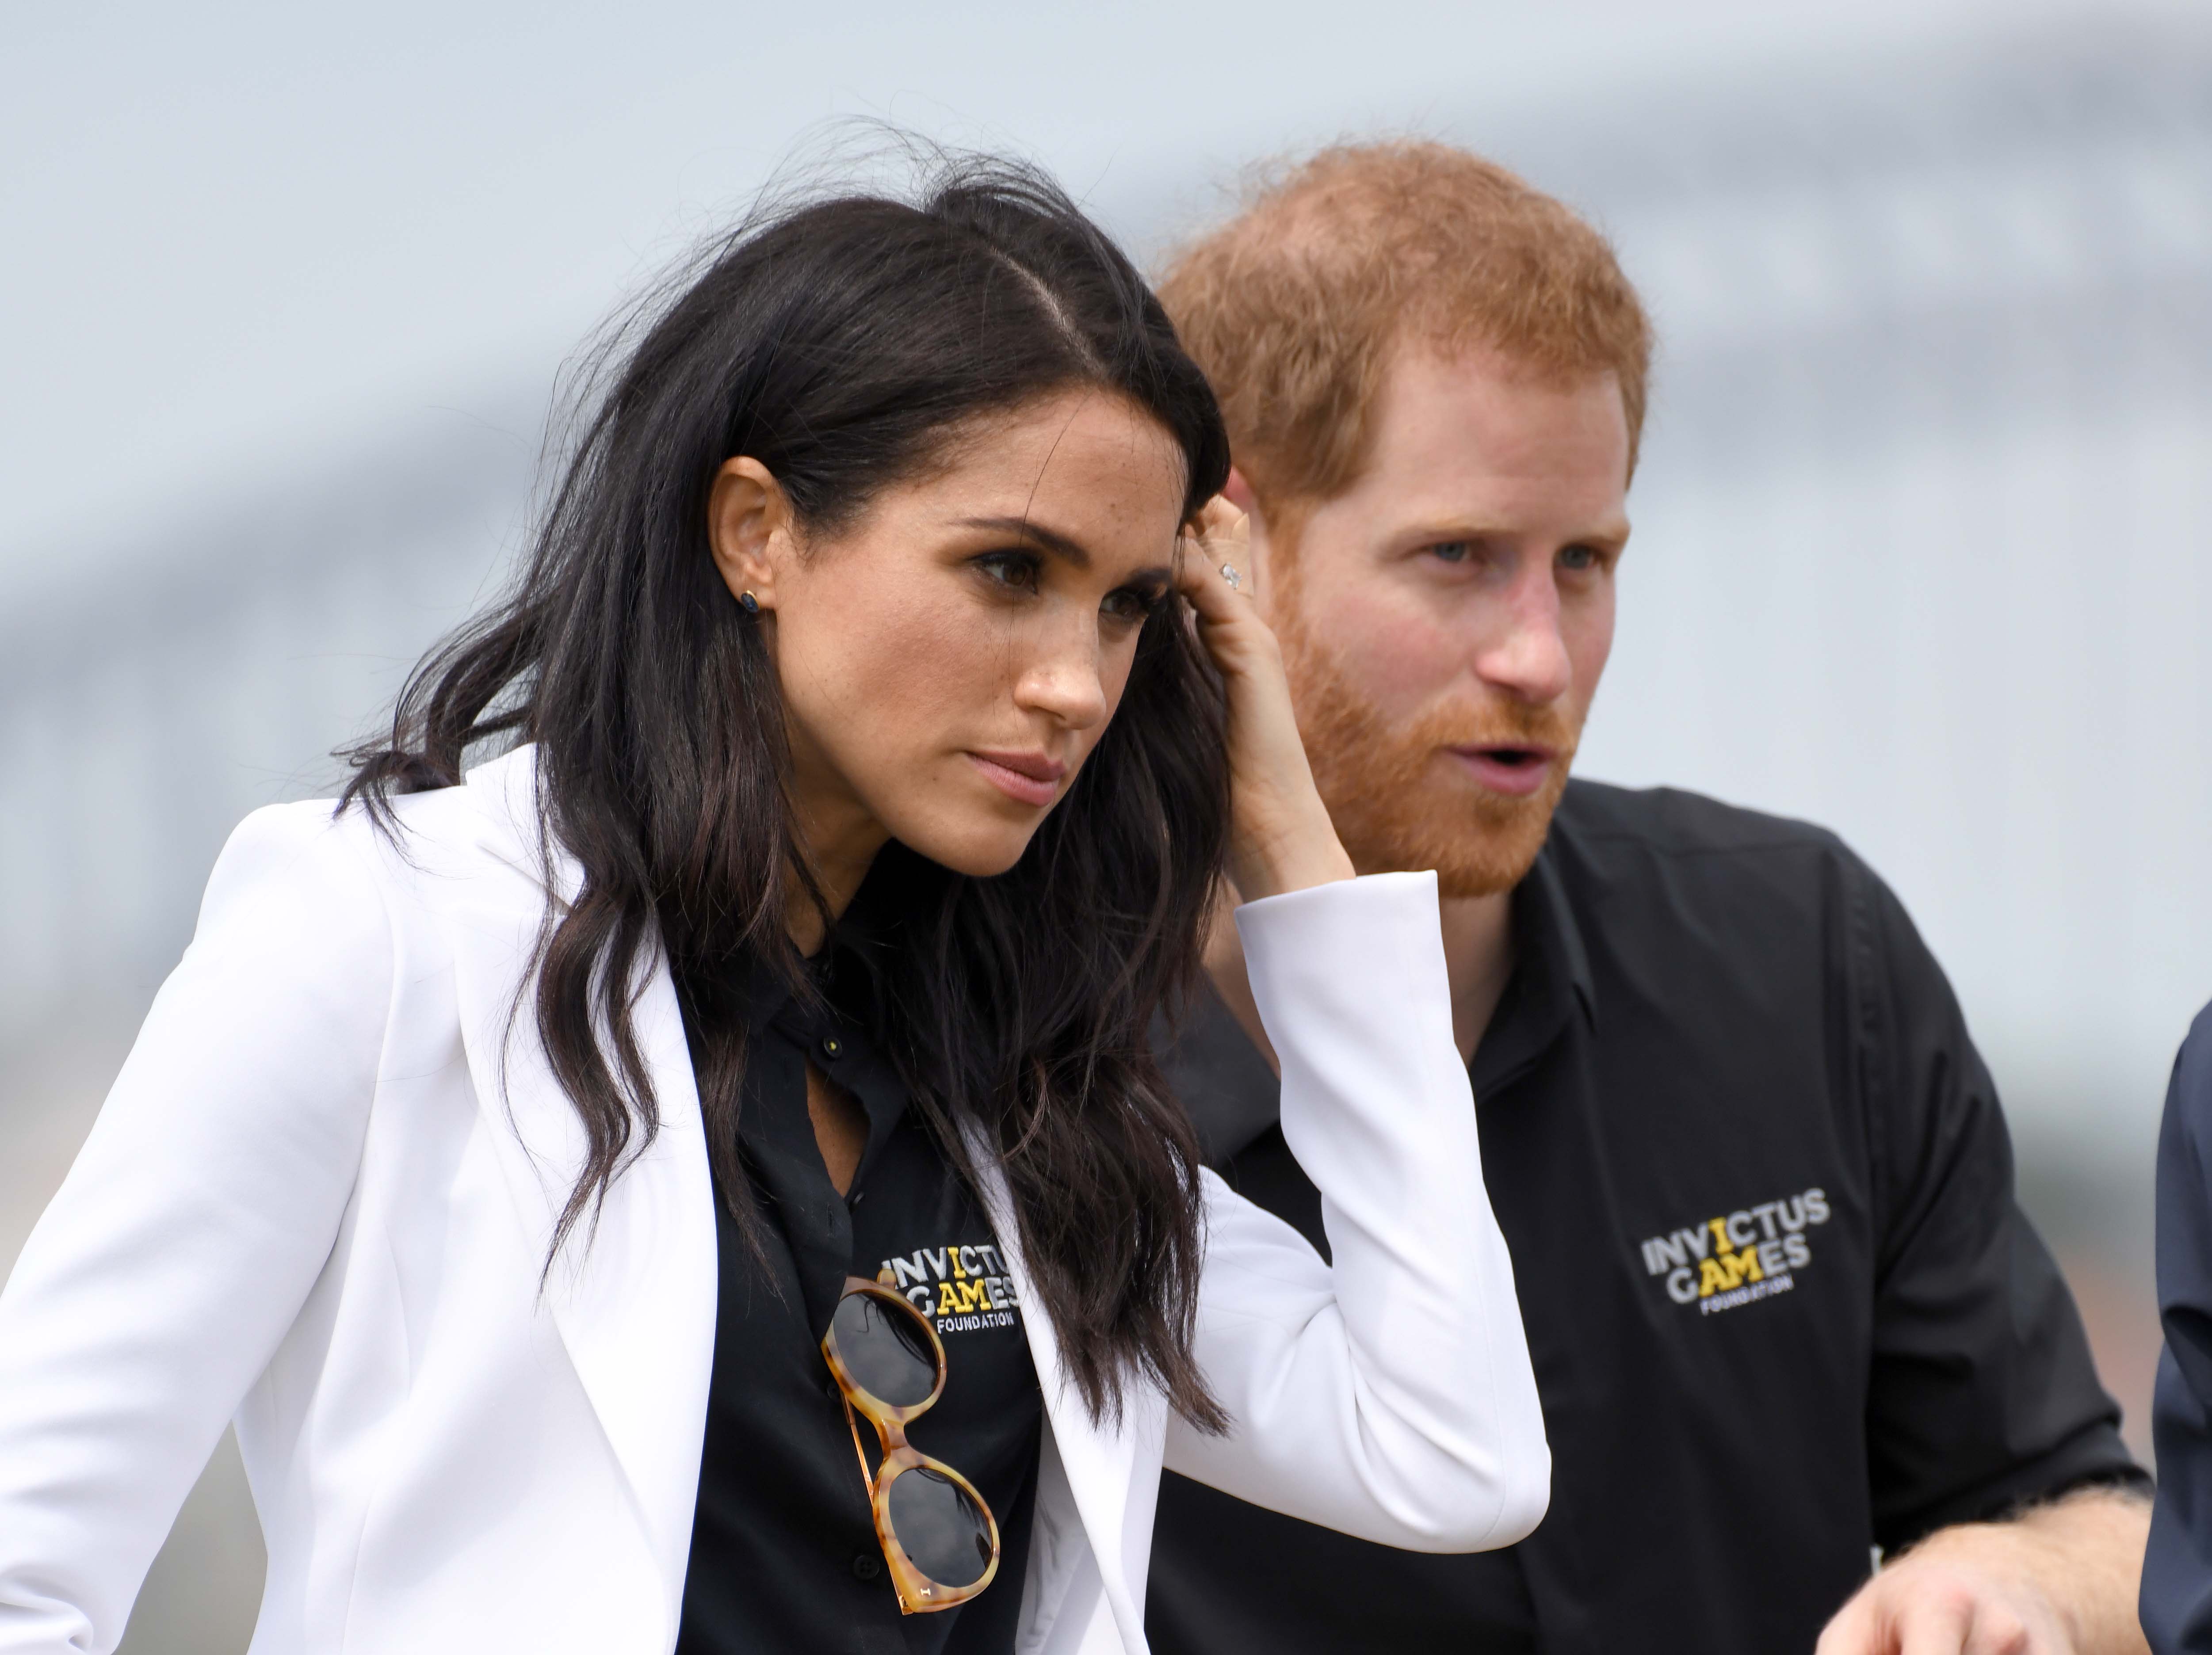 Prince Harry and Meghan Markle photographed together at Invictus Games in Sydney, Australia